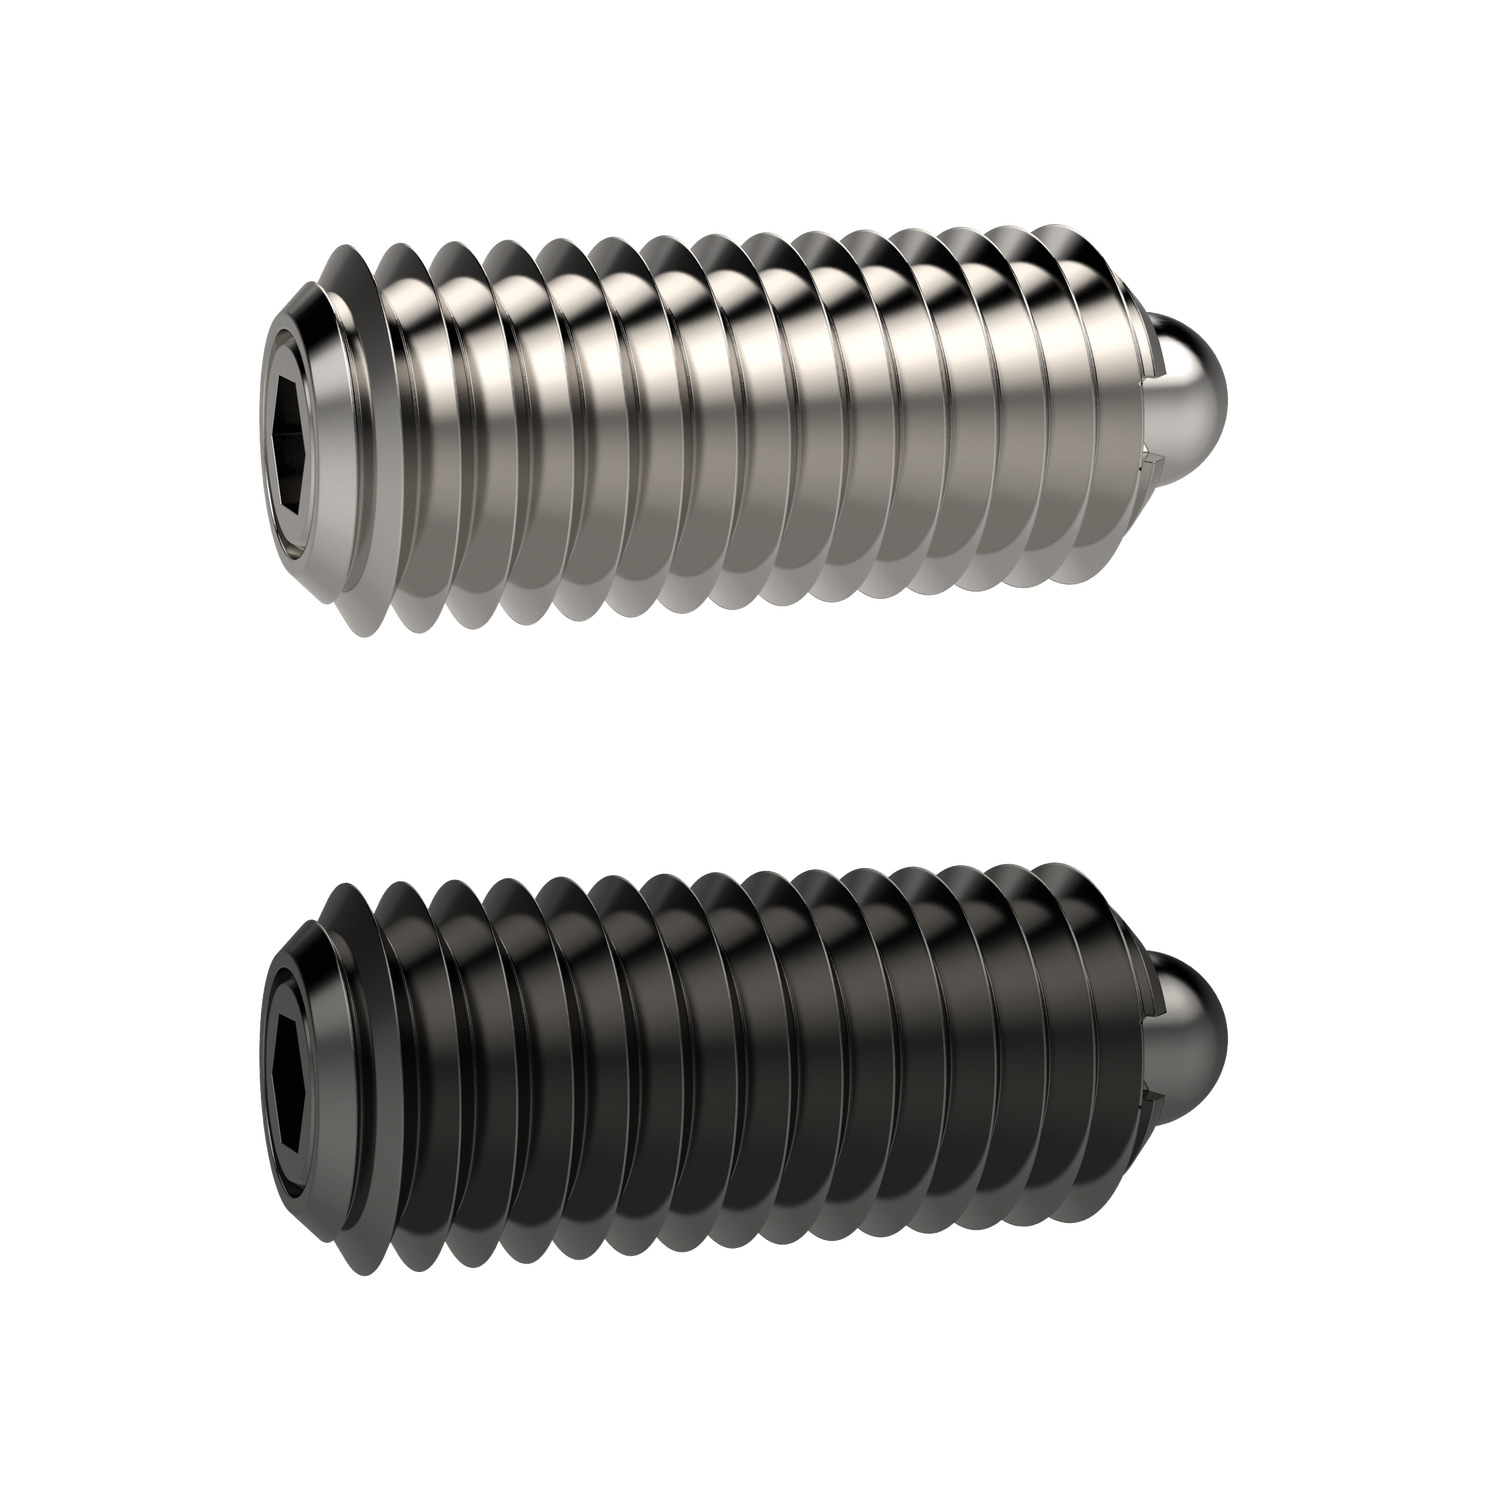 Spring Plungers Spring plungers with pin end & hex socket and seal. Available in steel and stainless steel. Incorporation of a seal into the design prevents liquid penetrating into the spring plunger.